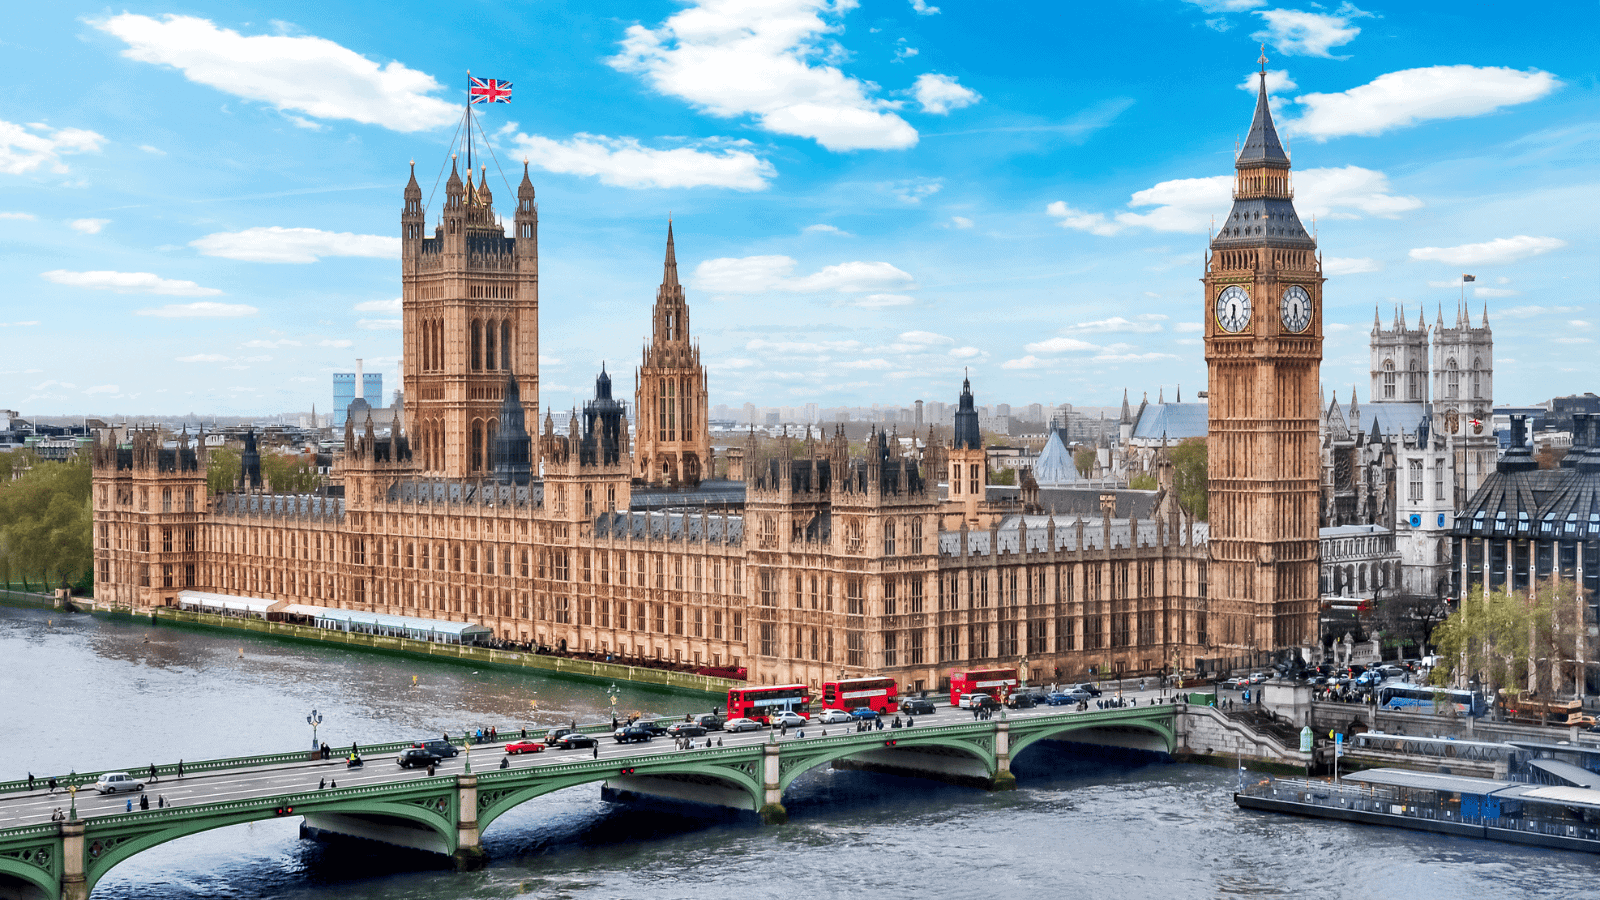 Houses of Parliament (Westminster palace) and Big Ben tower in London.